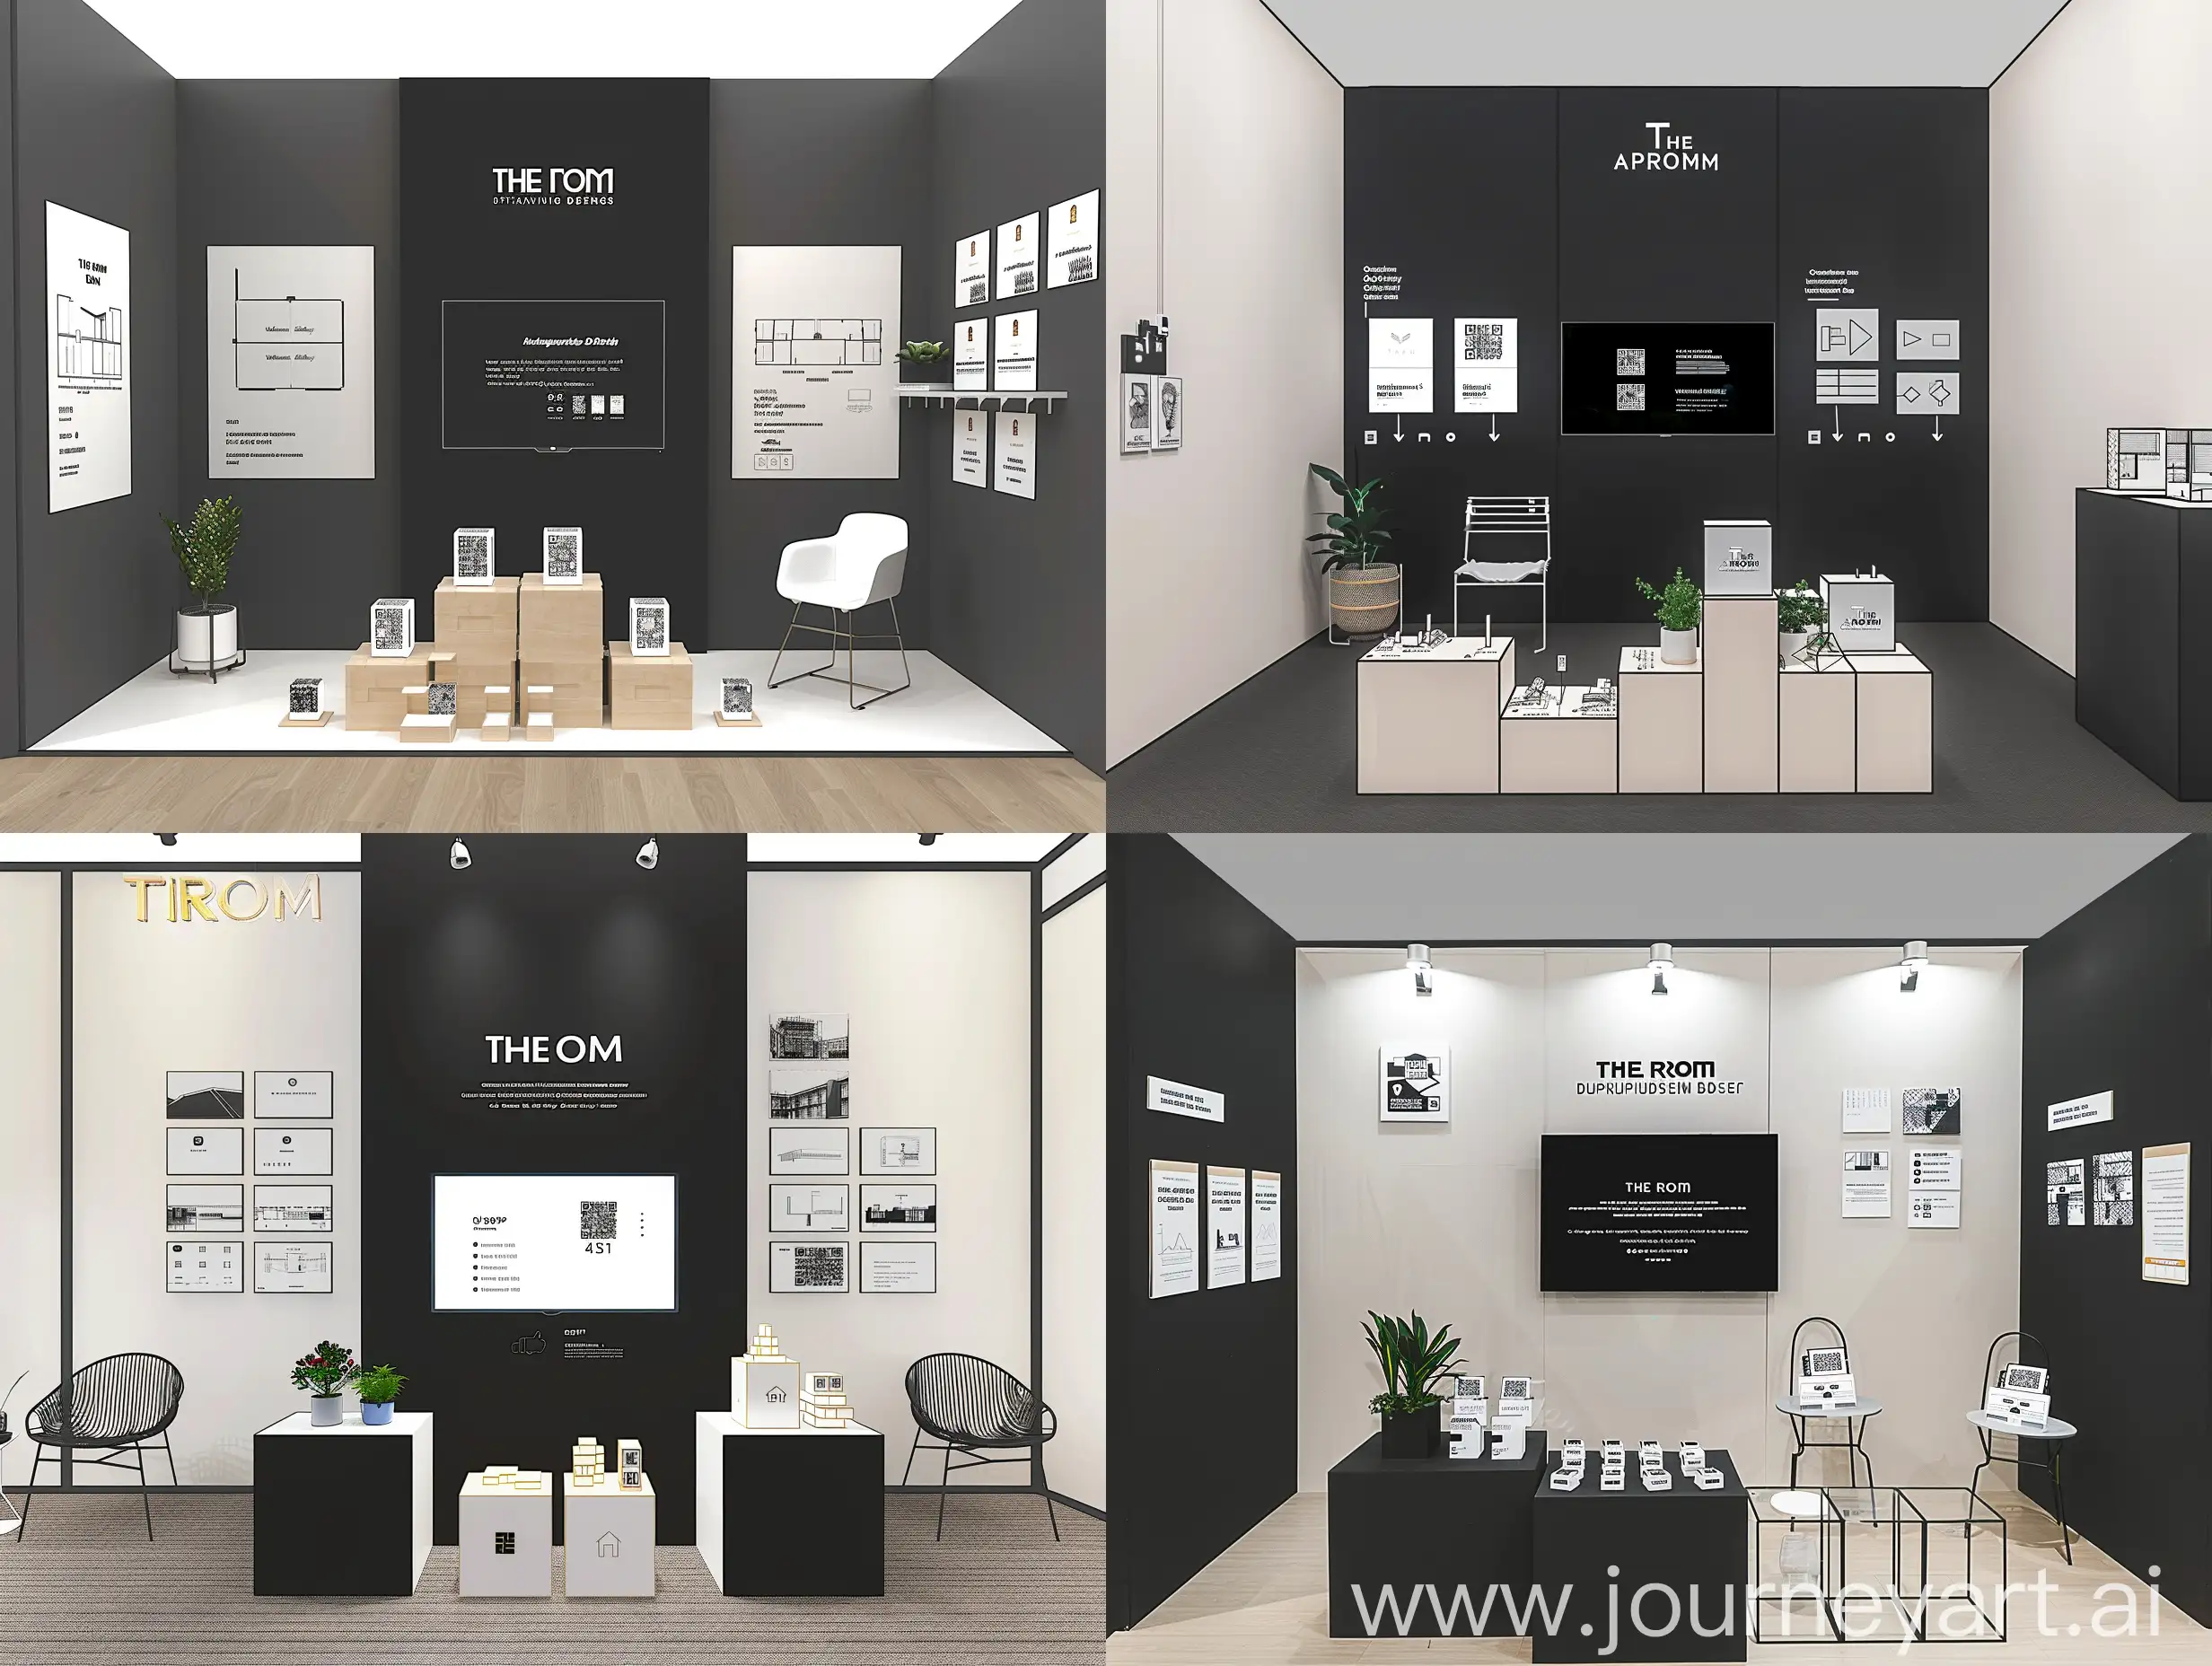 An interior design booth, black-white-warm mood tone, modern design, simple, artistic and functional. There is black a back wall at the middle with The Room Architecture and Design logo and smart TV showing the company architectural design service; shows QR codes with some steps to download a VR models. company postures hanging, 2 chairs with planter pot.  3 modular boxes with architectural physical models, many tiny qr codes cubes, and architectural games. 